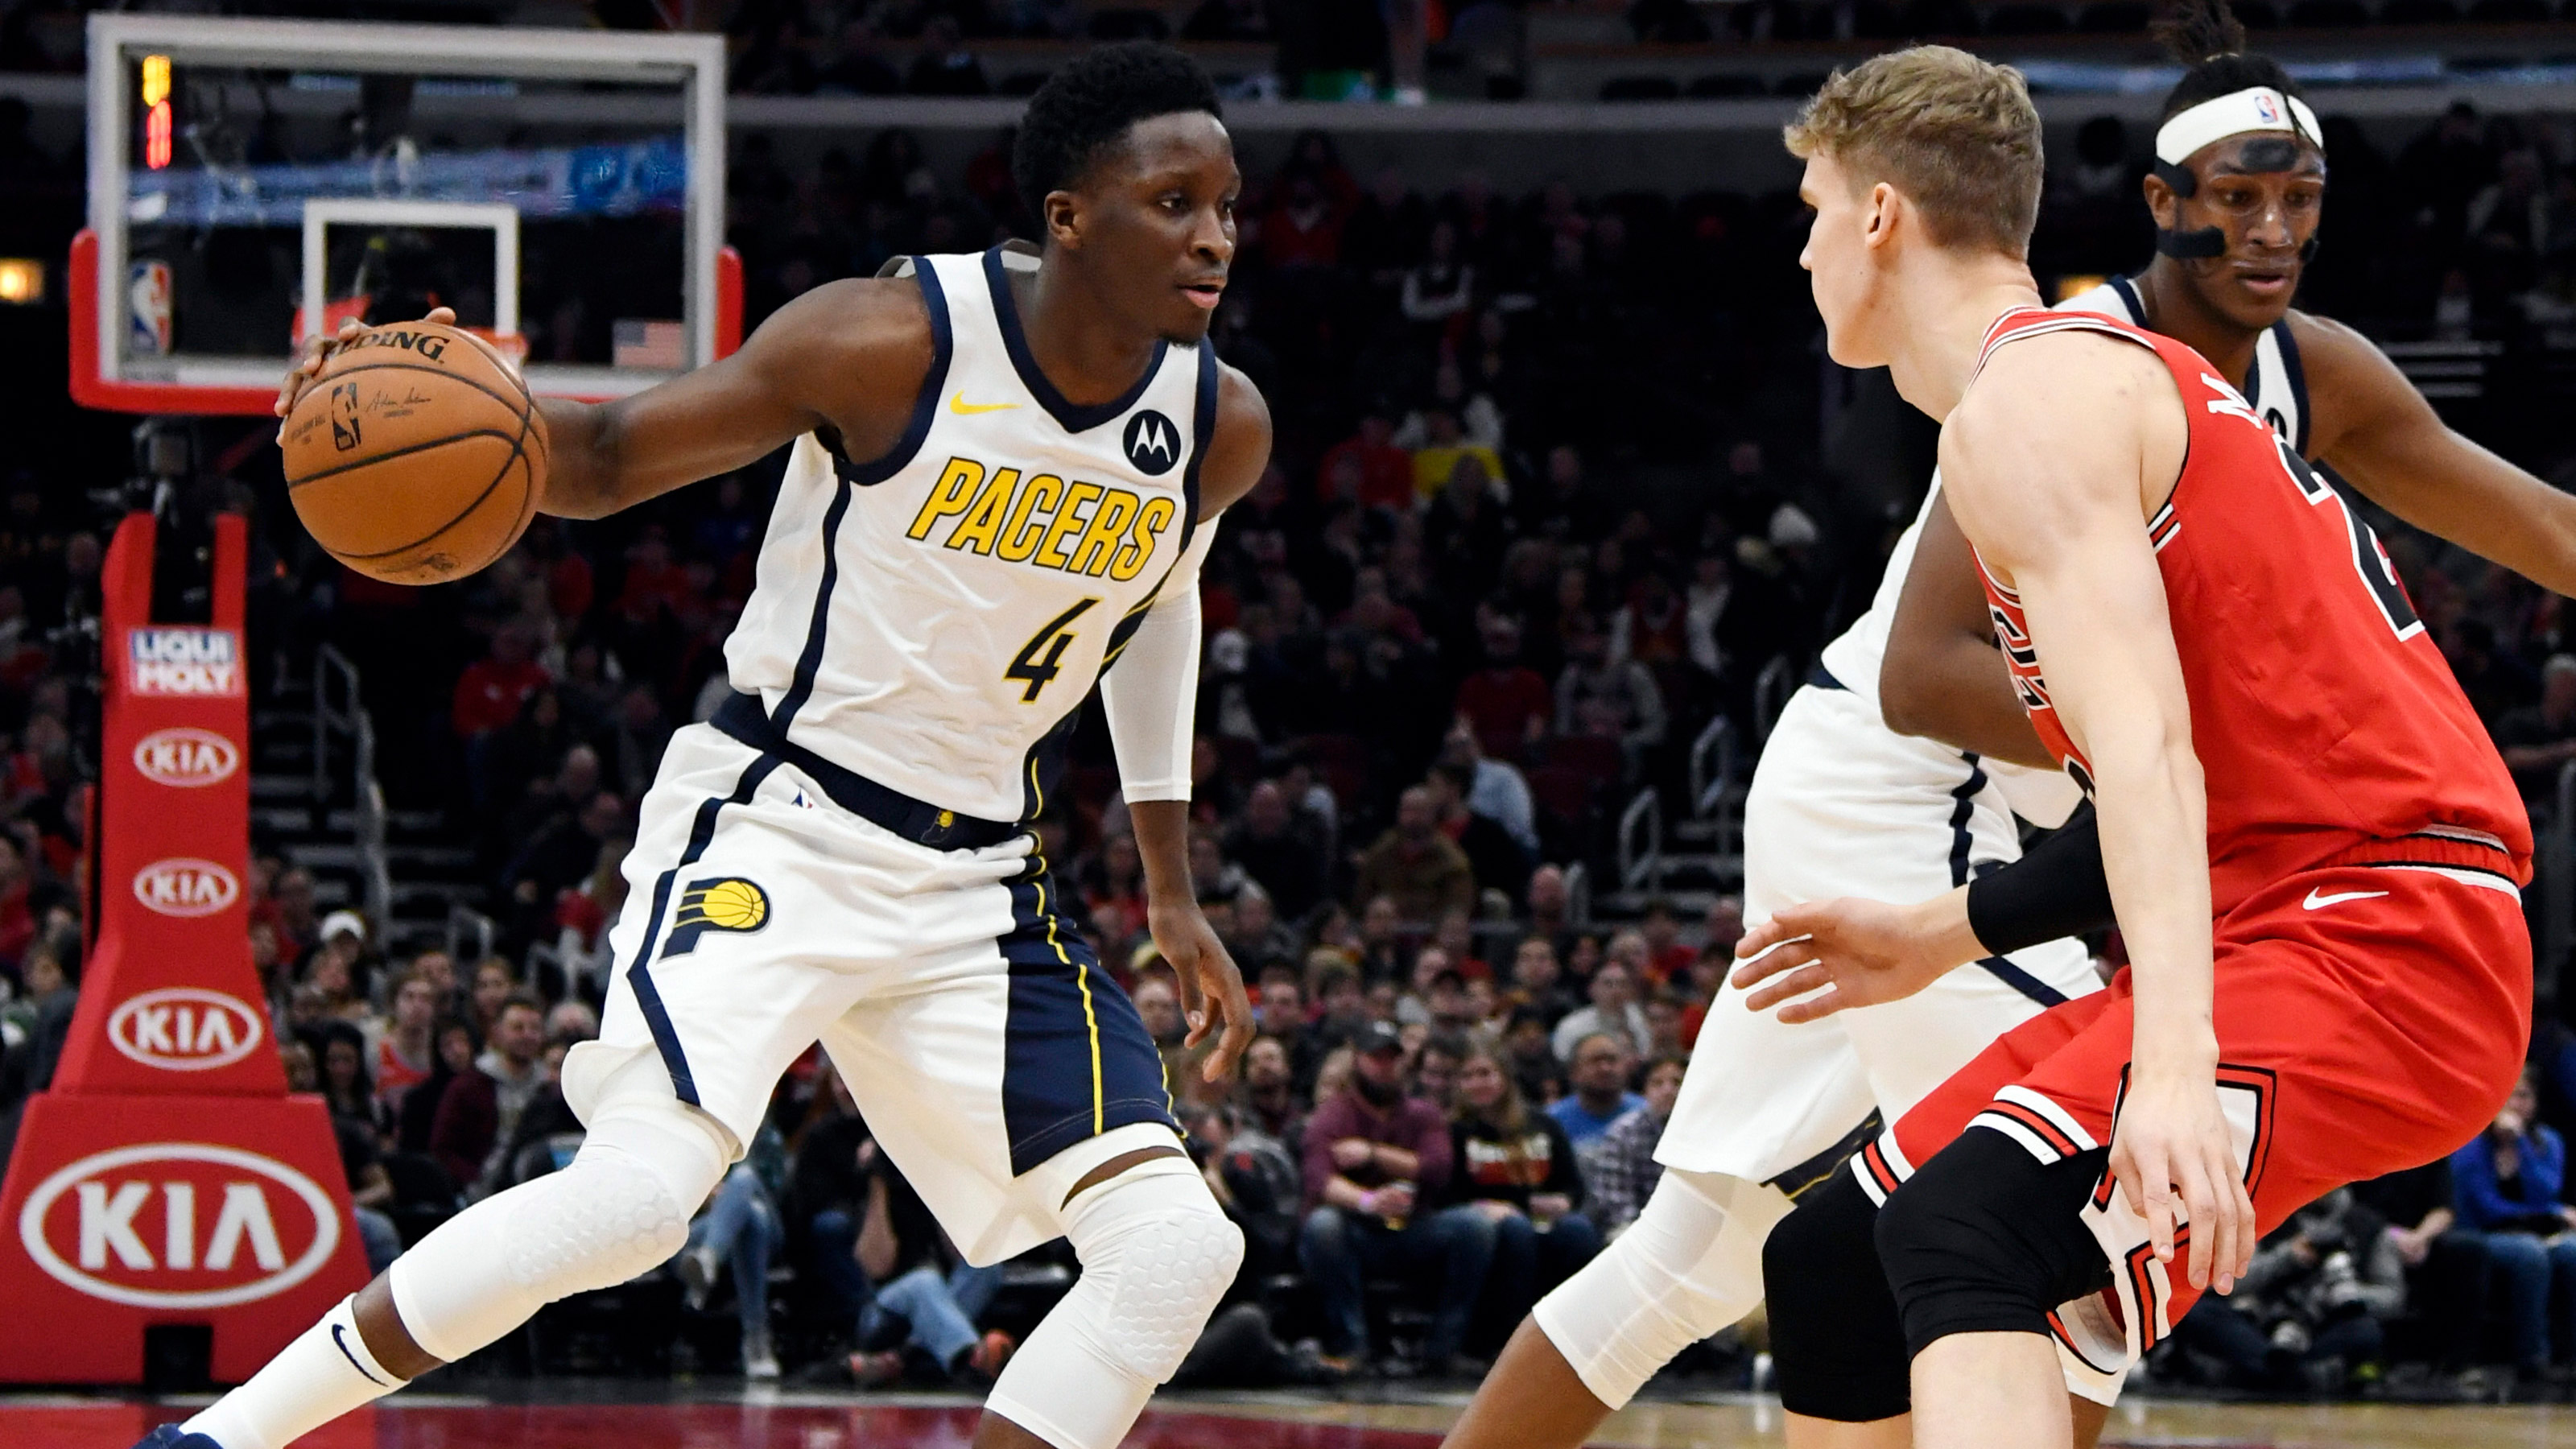 Oladipo scores 36 including game-winner in Pacers' 119-116 OT victory